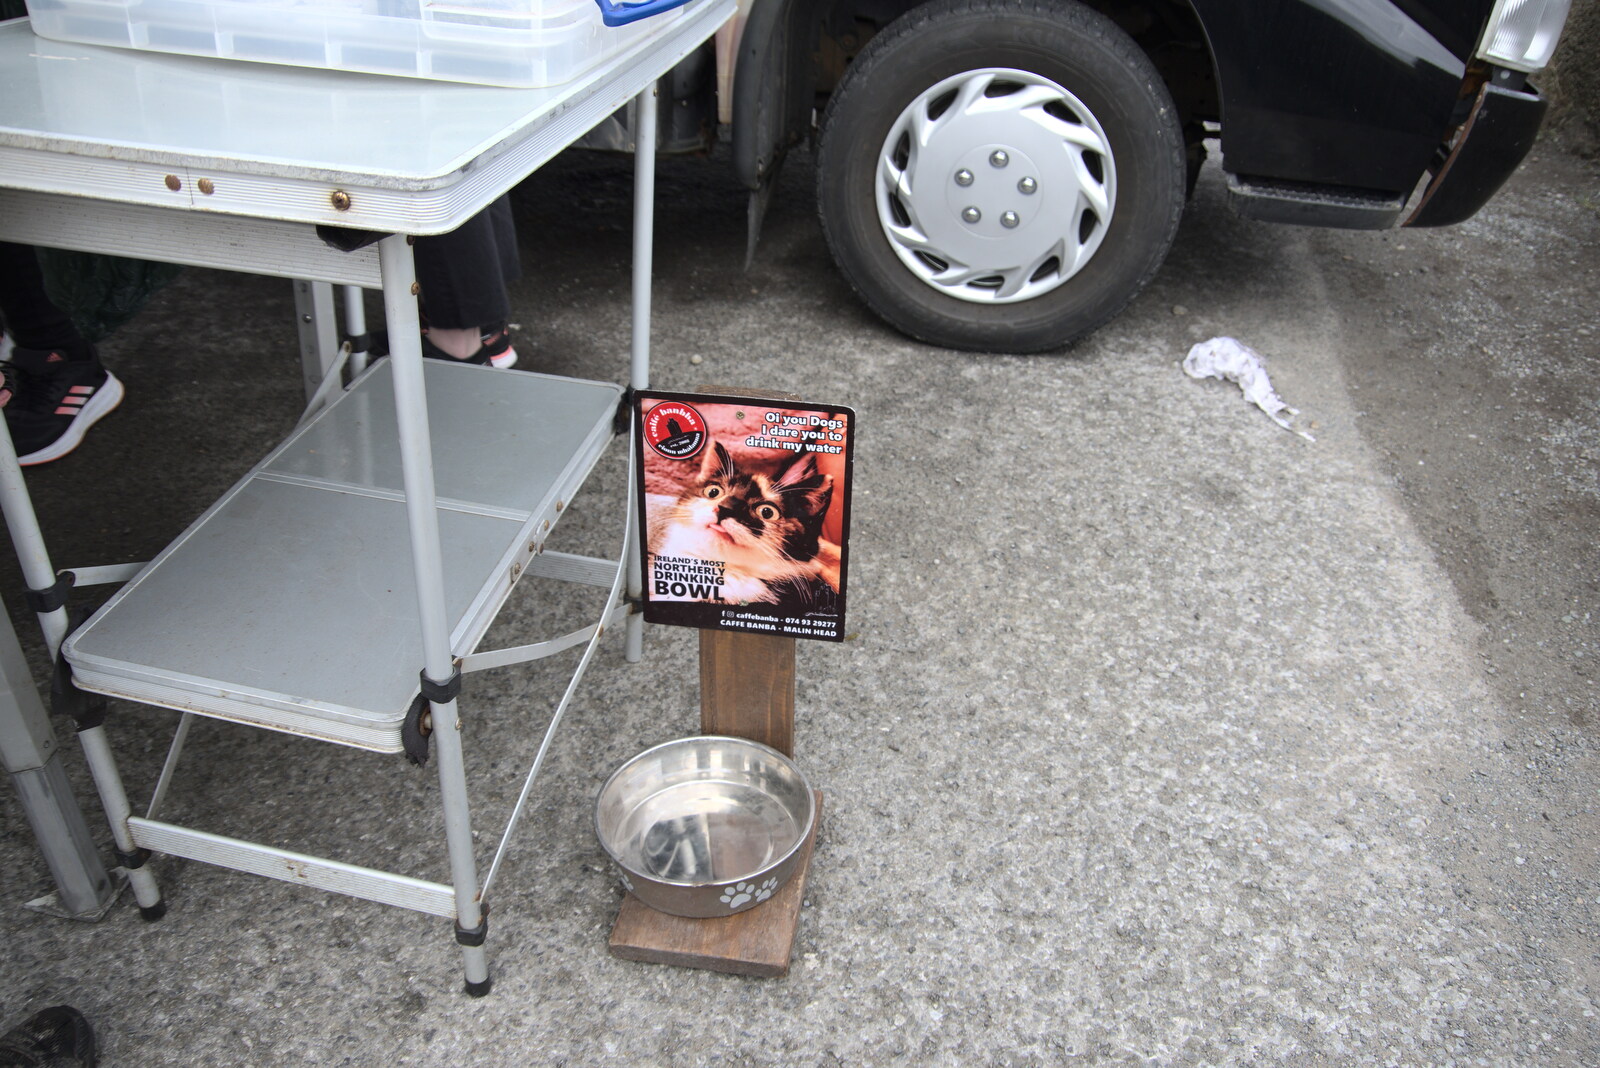 Greencastle, Doagh and Malin Head, County Donegal, Ireland - 19th April 2022: A dog bowl with a scary cat photo